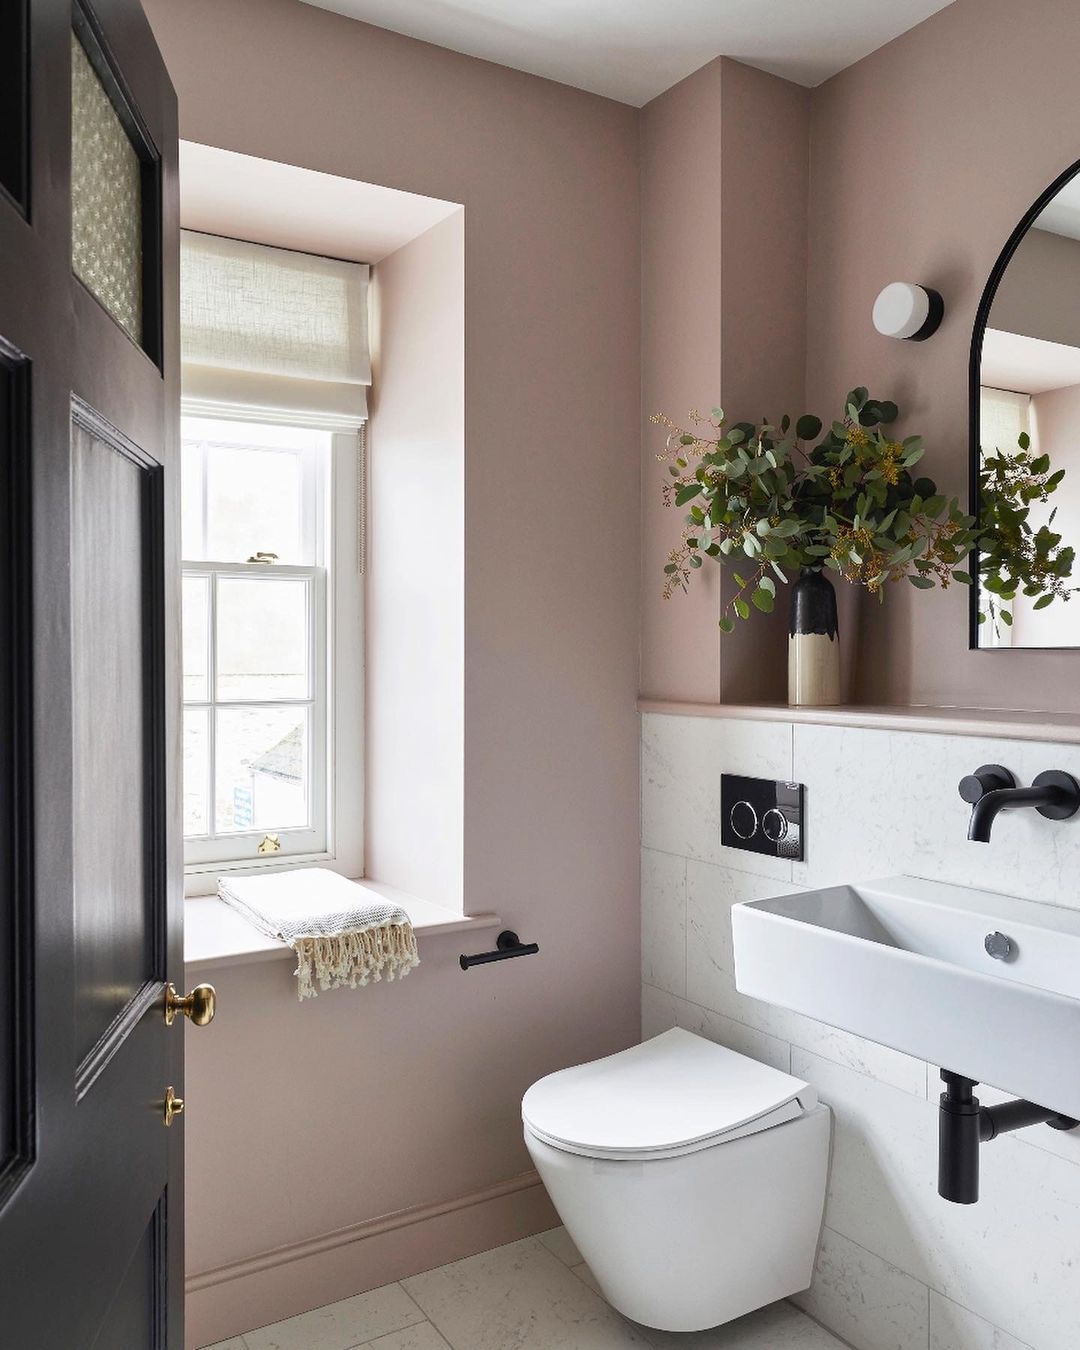 Bathroom Colors: Transform Your Space with the Right Color Palette